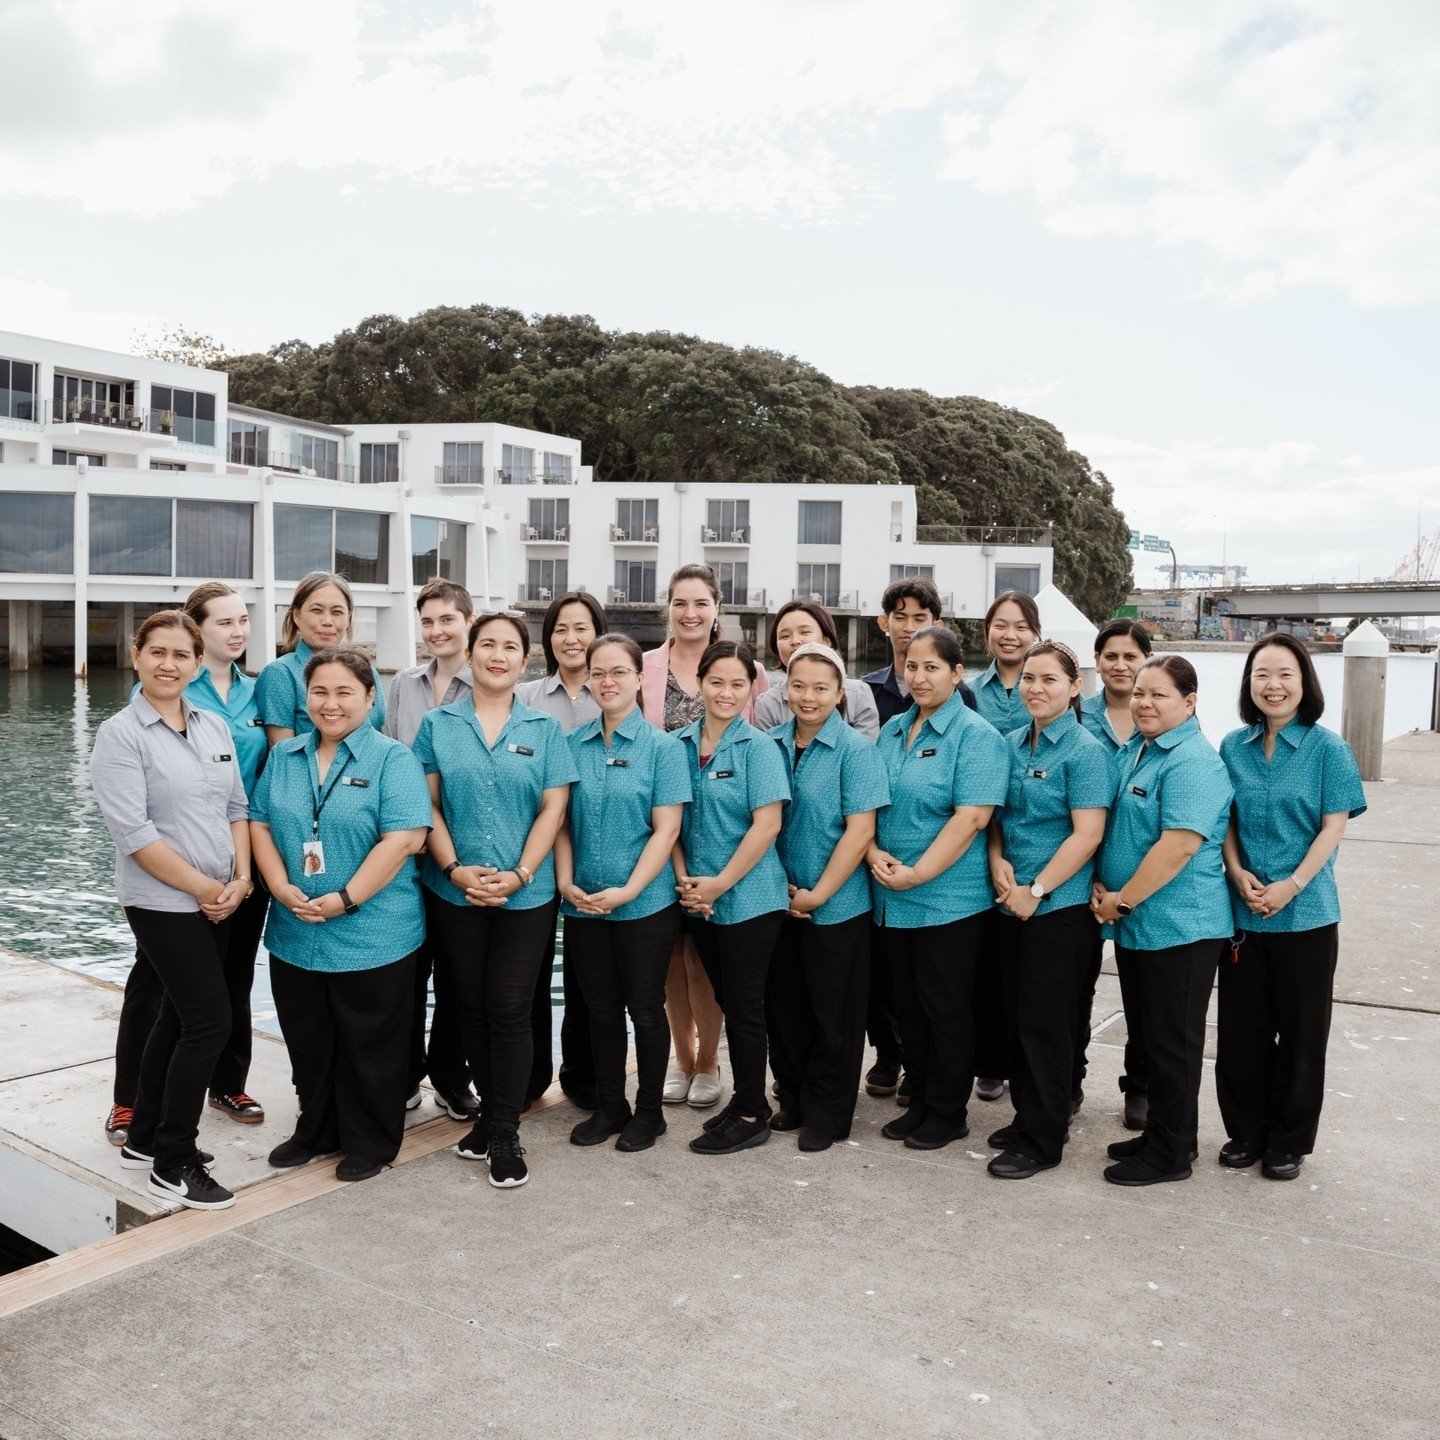 Meet our amazing and hardworking housekeeping team, dedicated to keeping our rooms sparkling! It's always a pleasure to be graced by your smiling faces around the hotel.